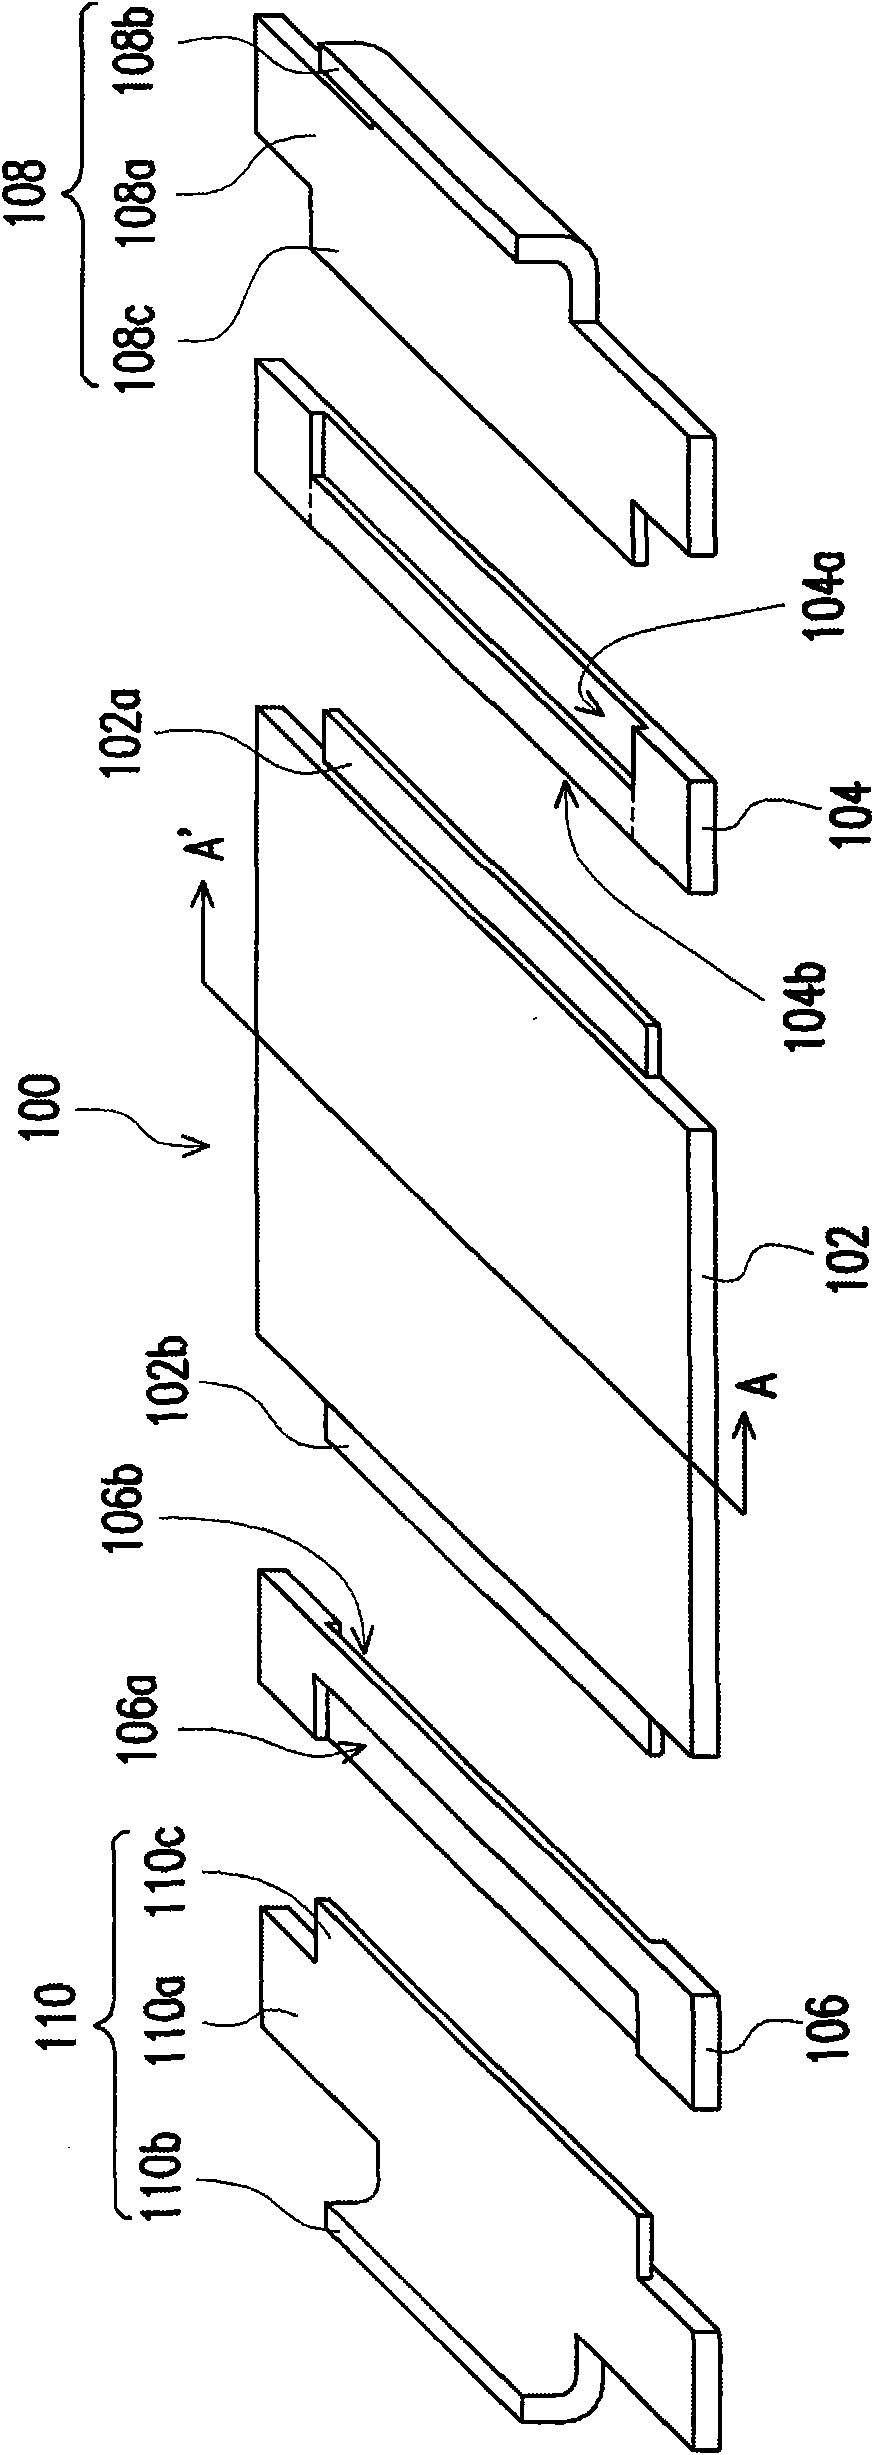 Battery provided with thermoelectric common channel with functions of temperature equalization and heat conduction, and end cover groups thereof